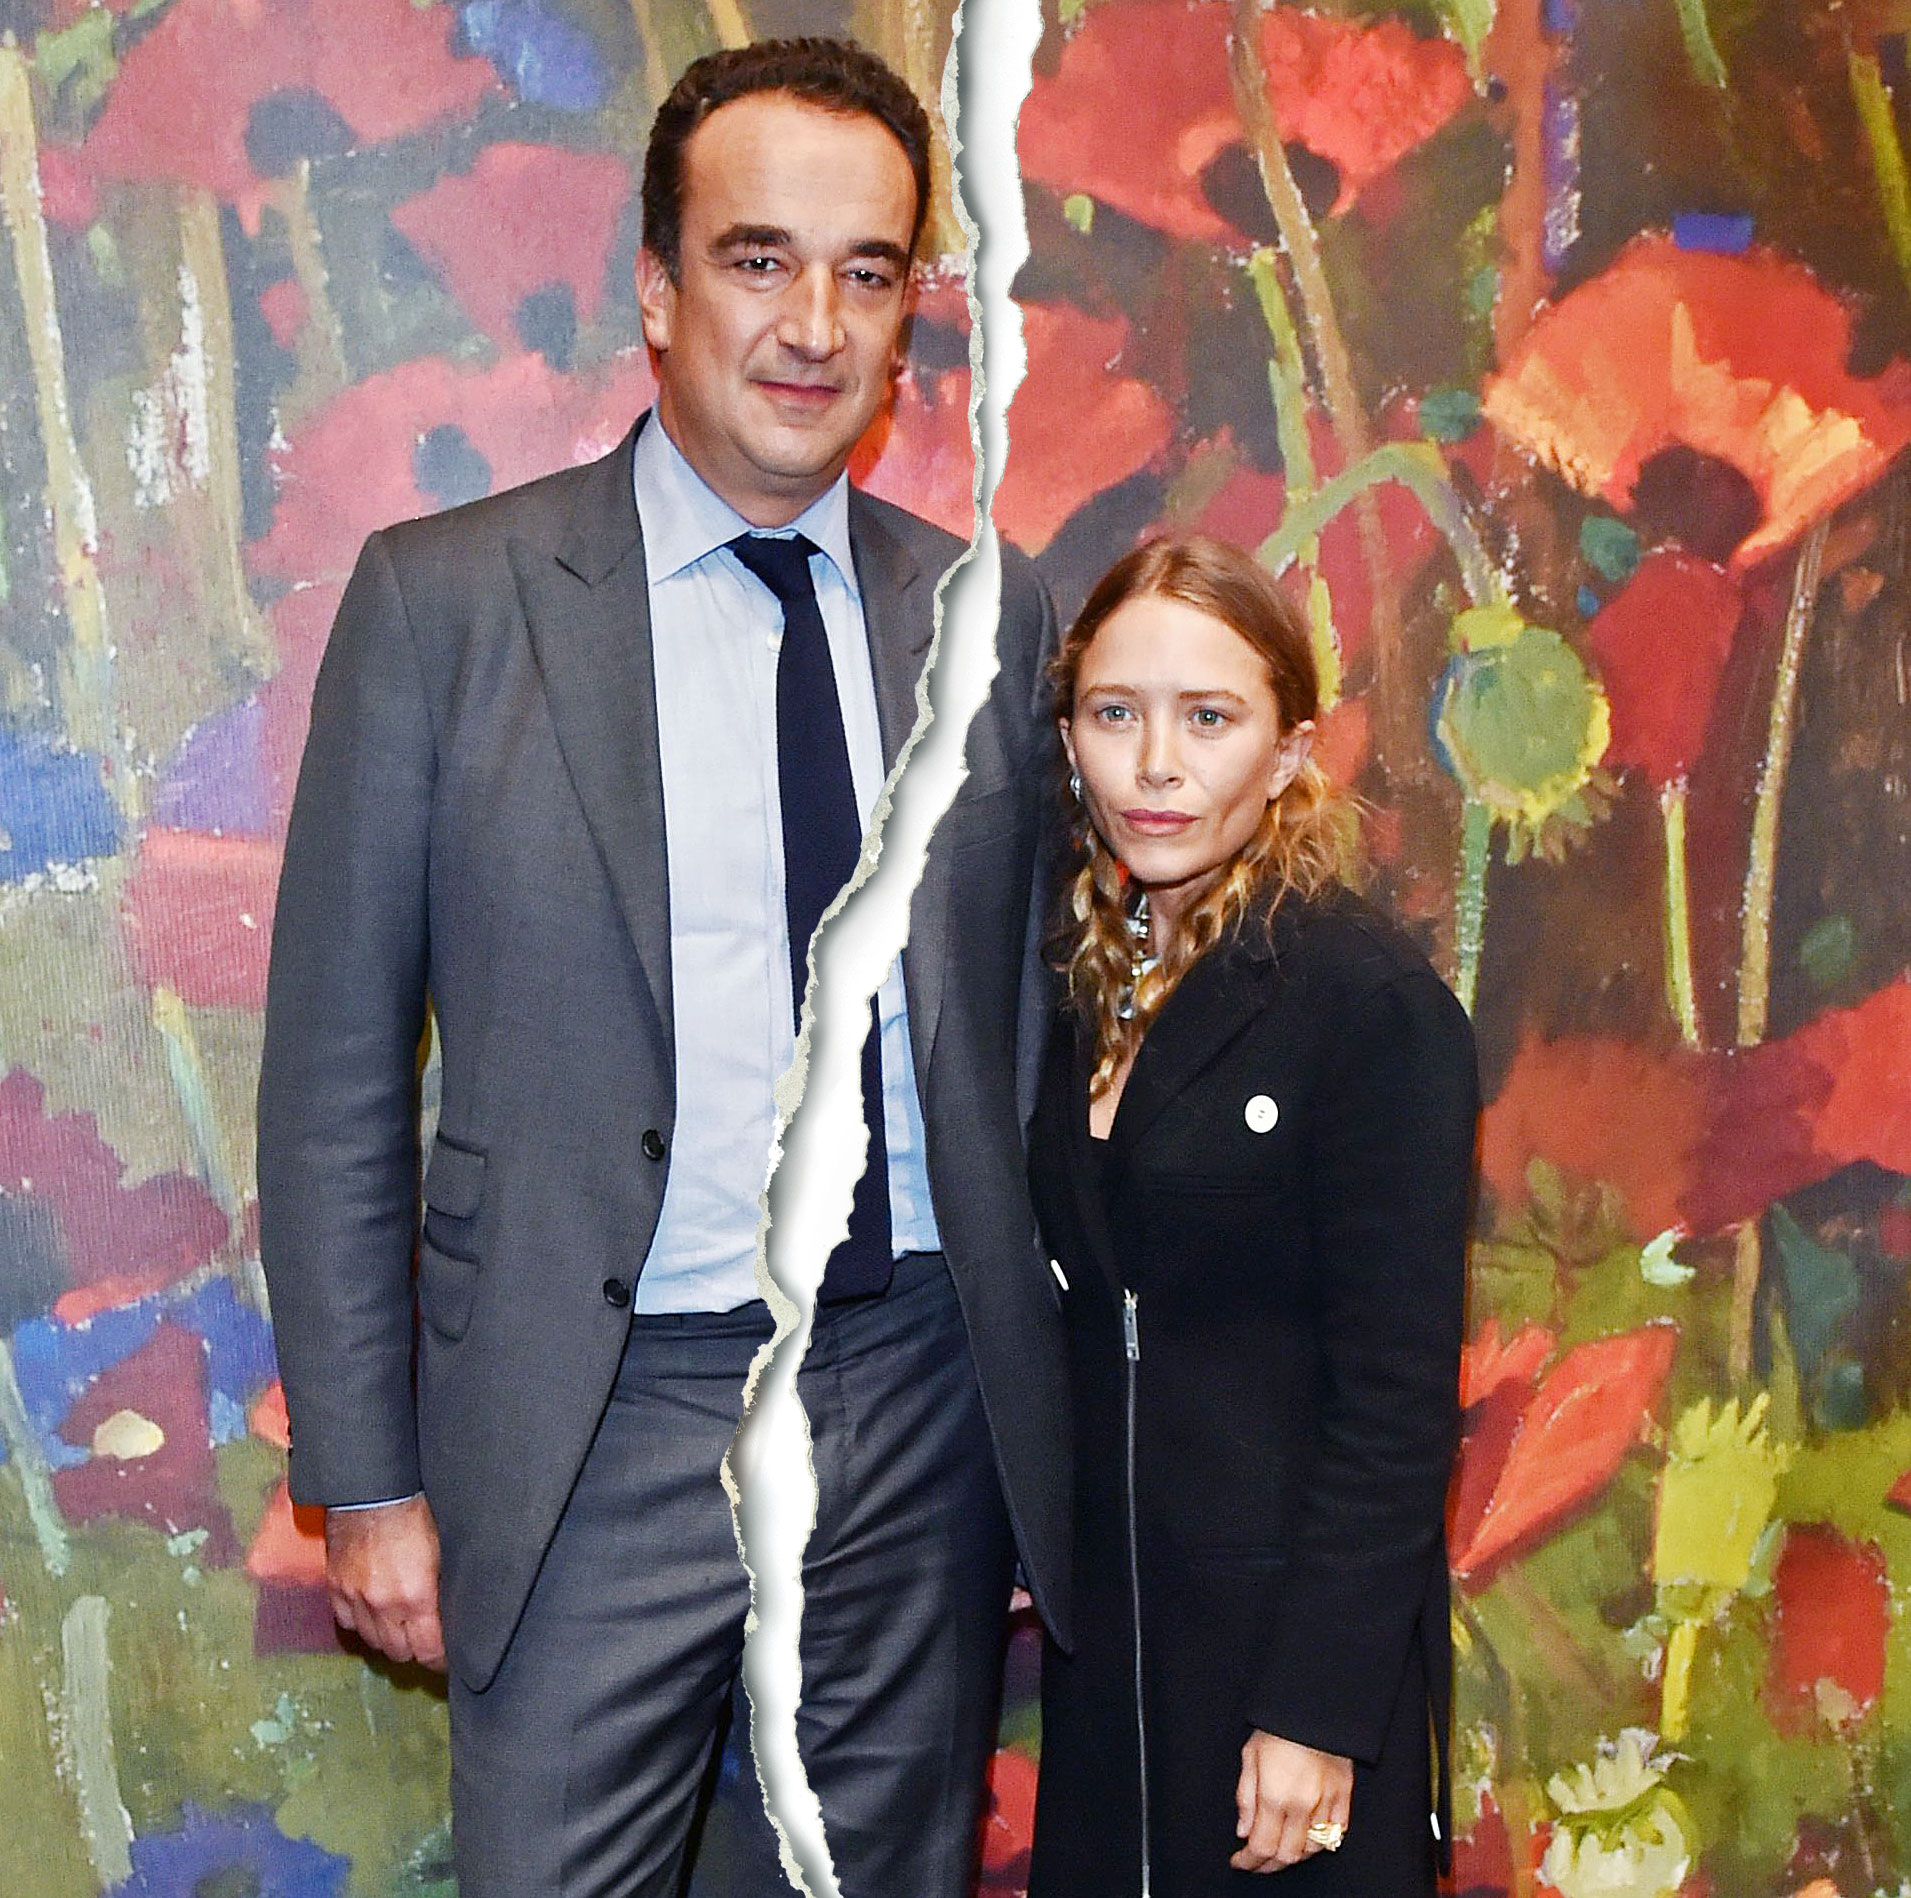 Mary-Kate Olsen, Olivier Sarkozy Split After 5 Years of Marriage image